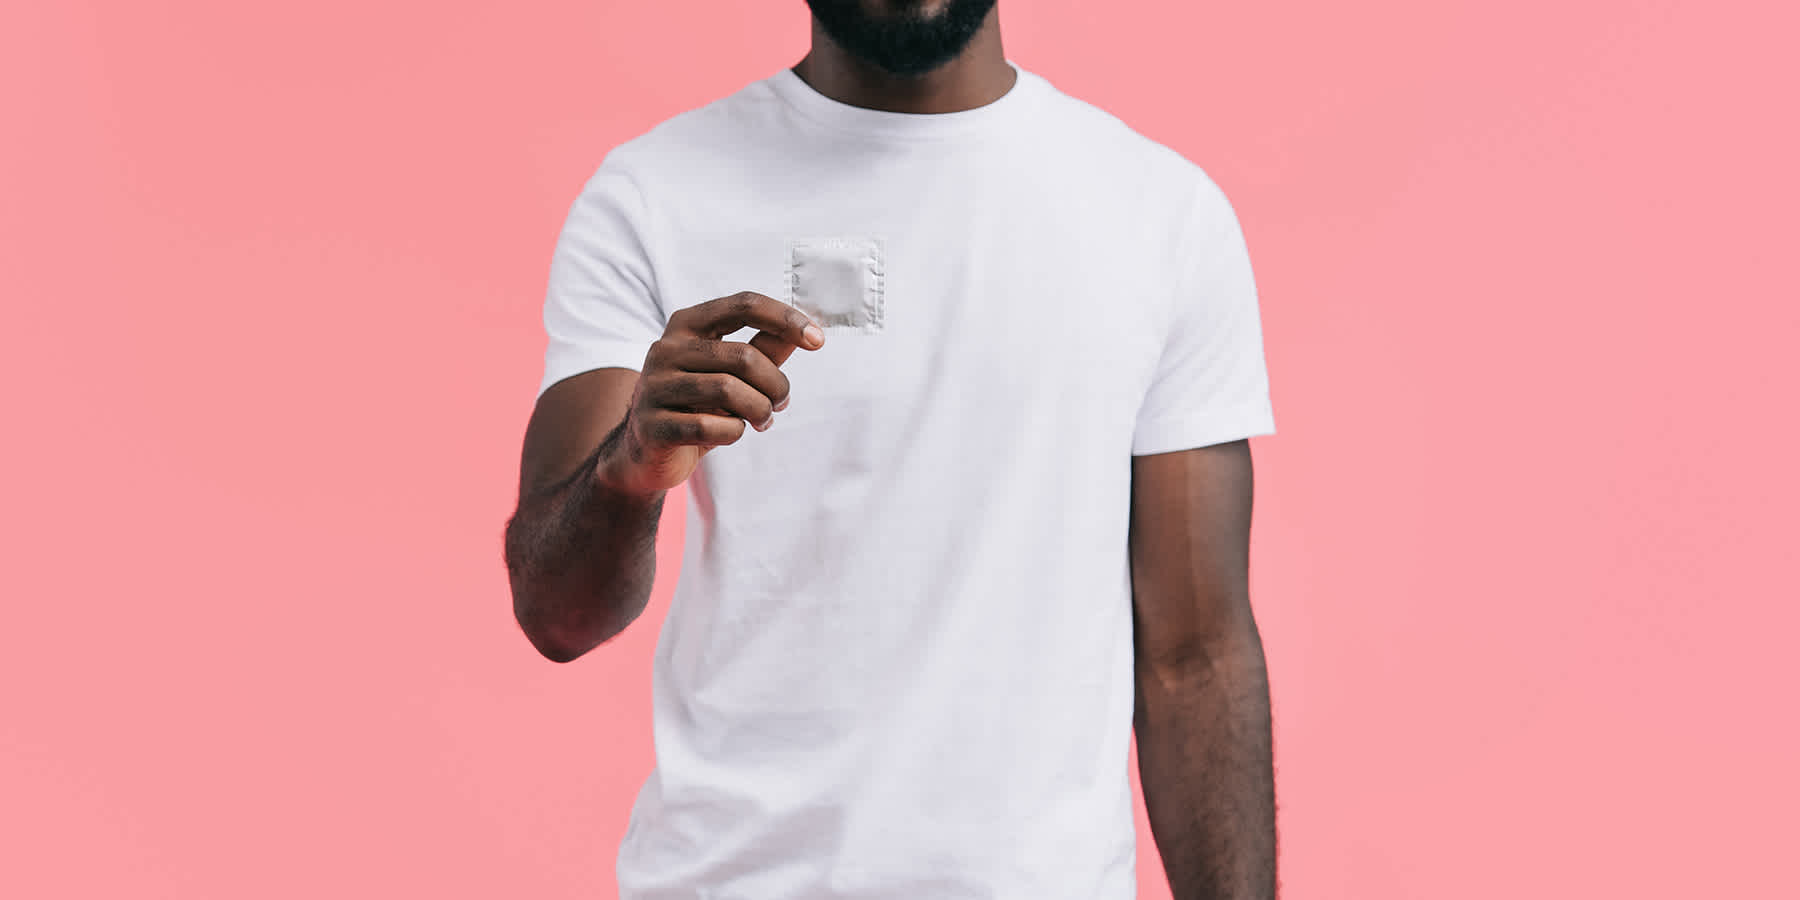 Man wearing white shirt and holding condom wrapper to represent men's sexual health